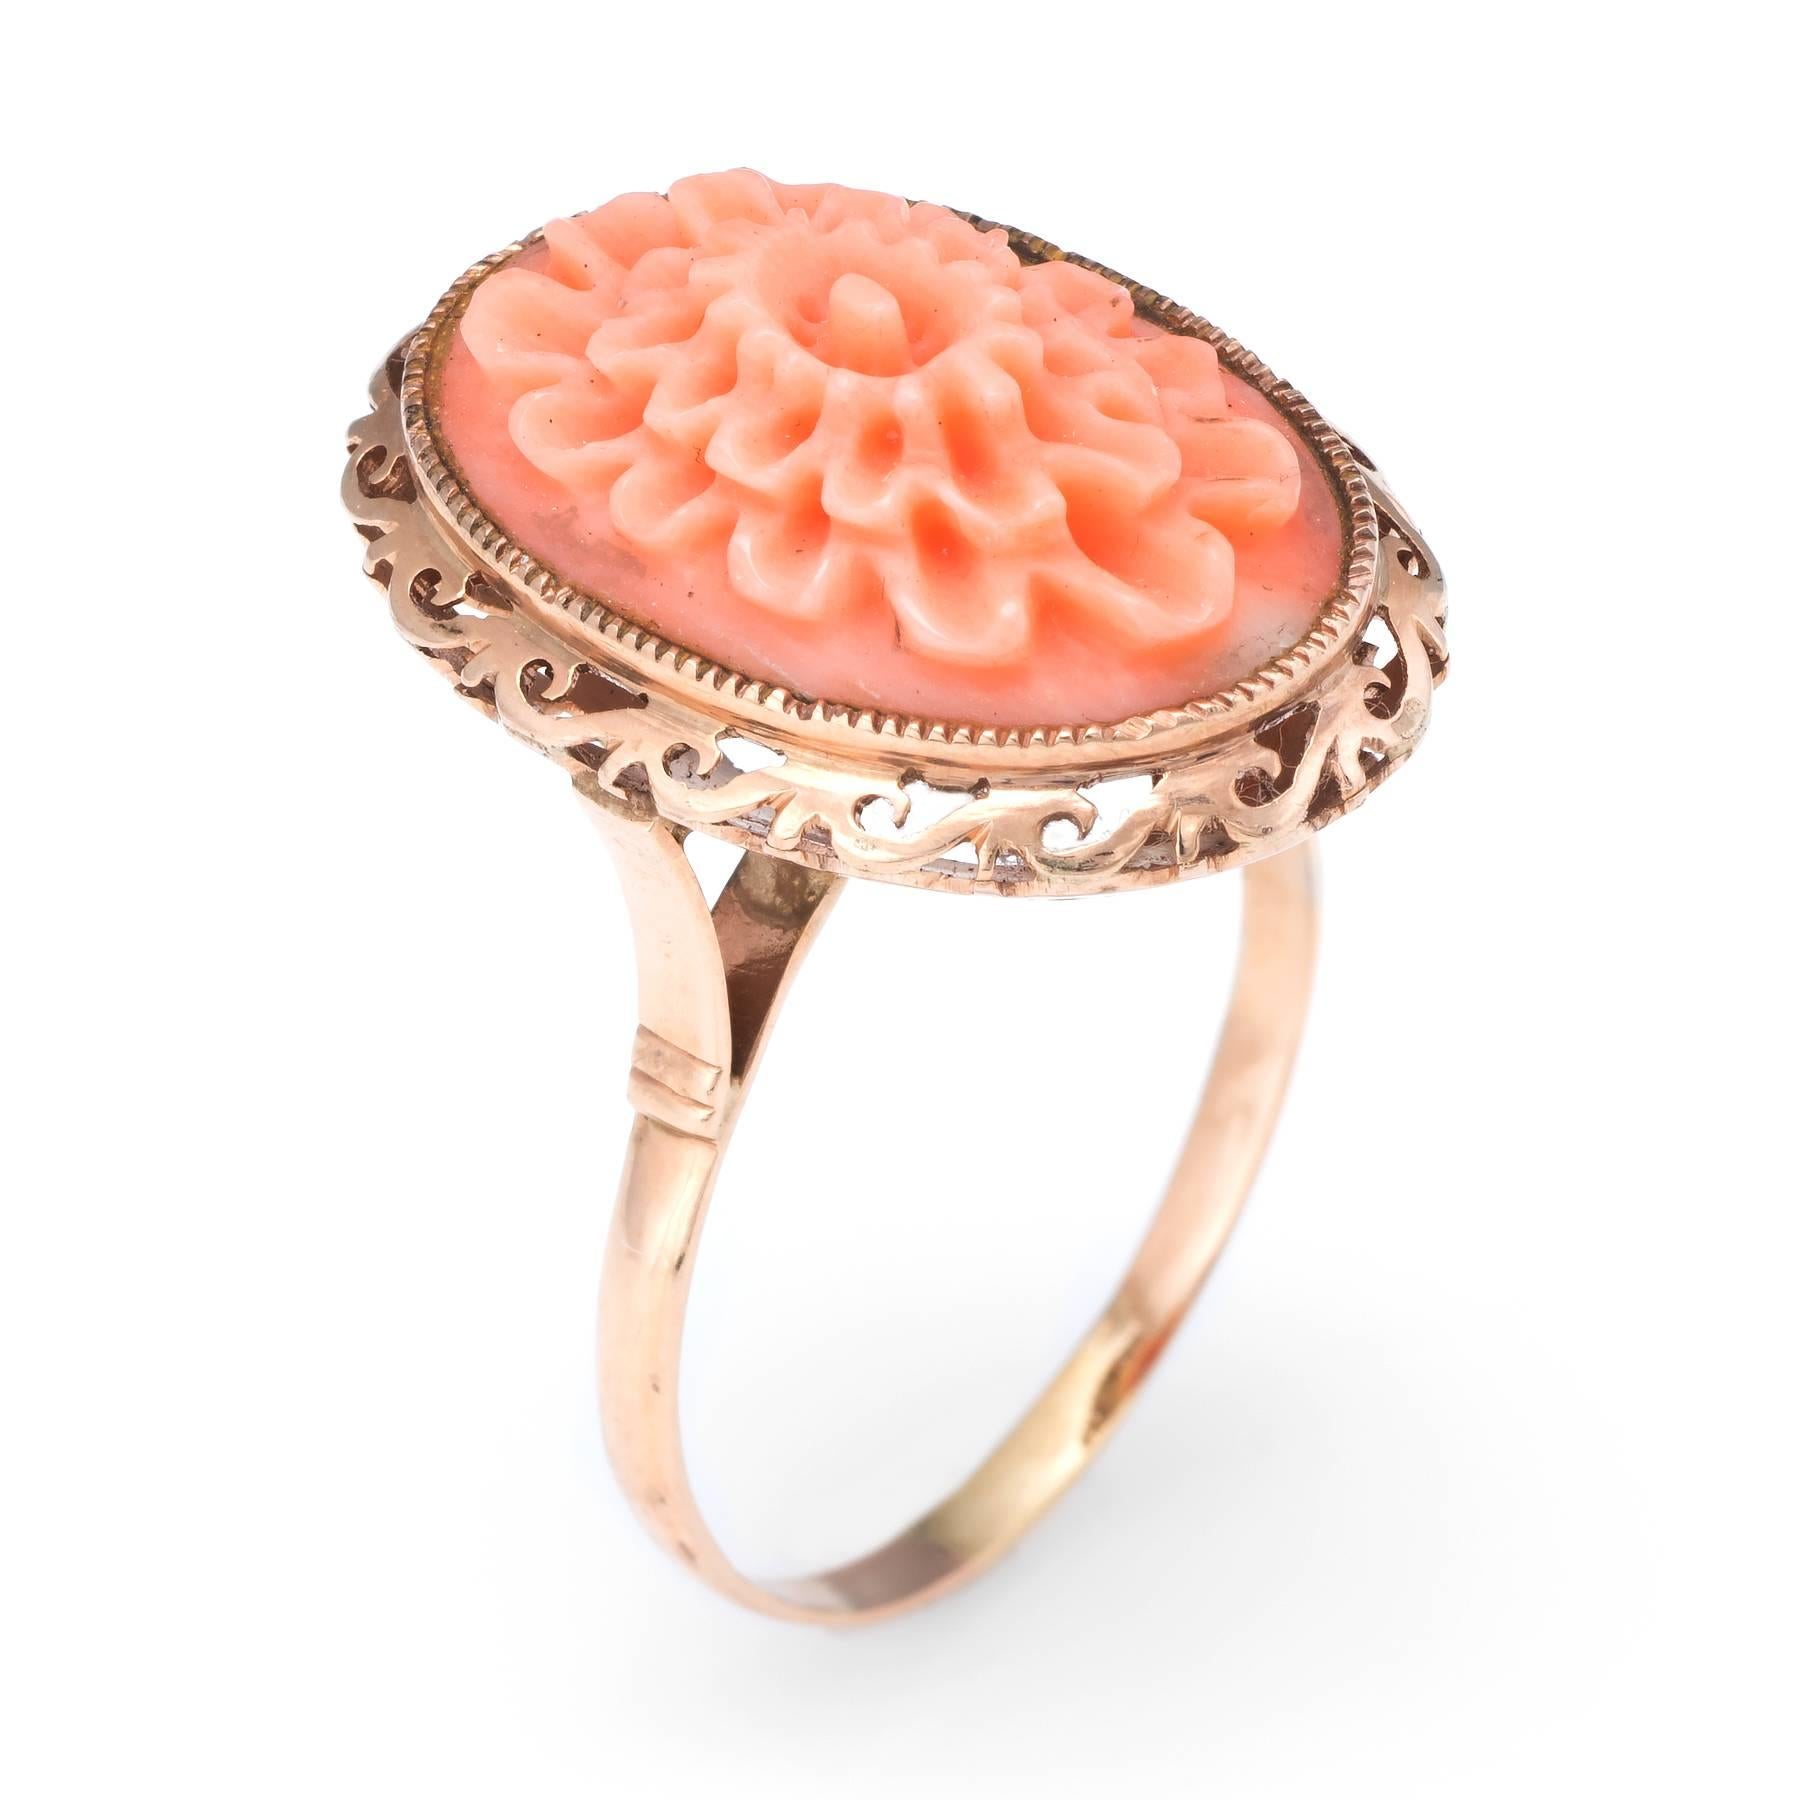 Overview:

Finely detailed vintage (circa 1950s to 1960s) cocktail ring, crafted in 14 karat yellow gold. 

Natural cabochon coral is intricately carved in the form of a blooming flower. The coral measures 20mm x 13mm (in excellent condition and